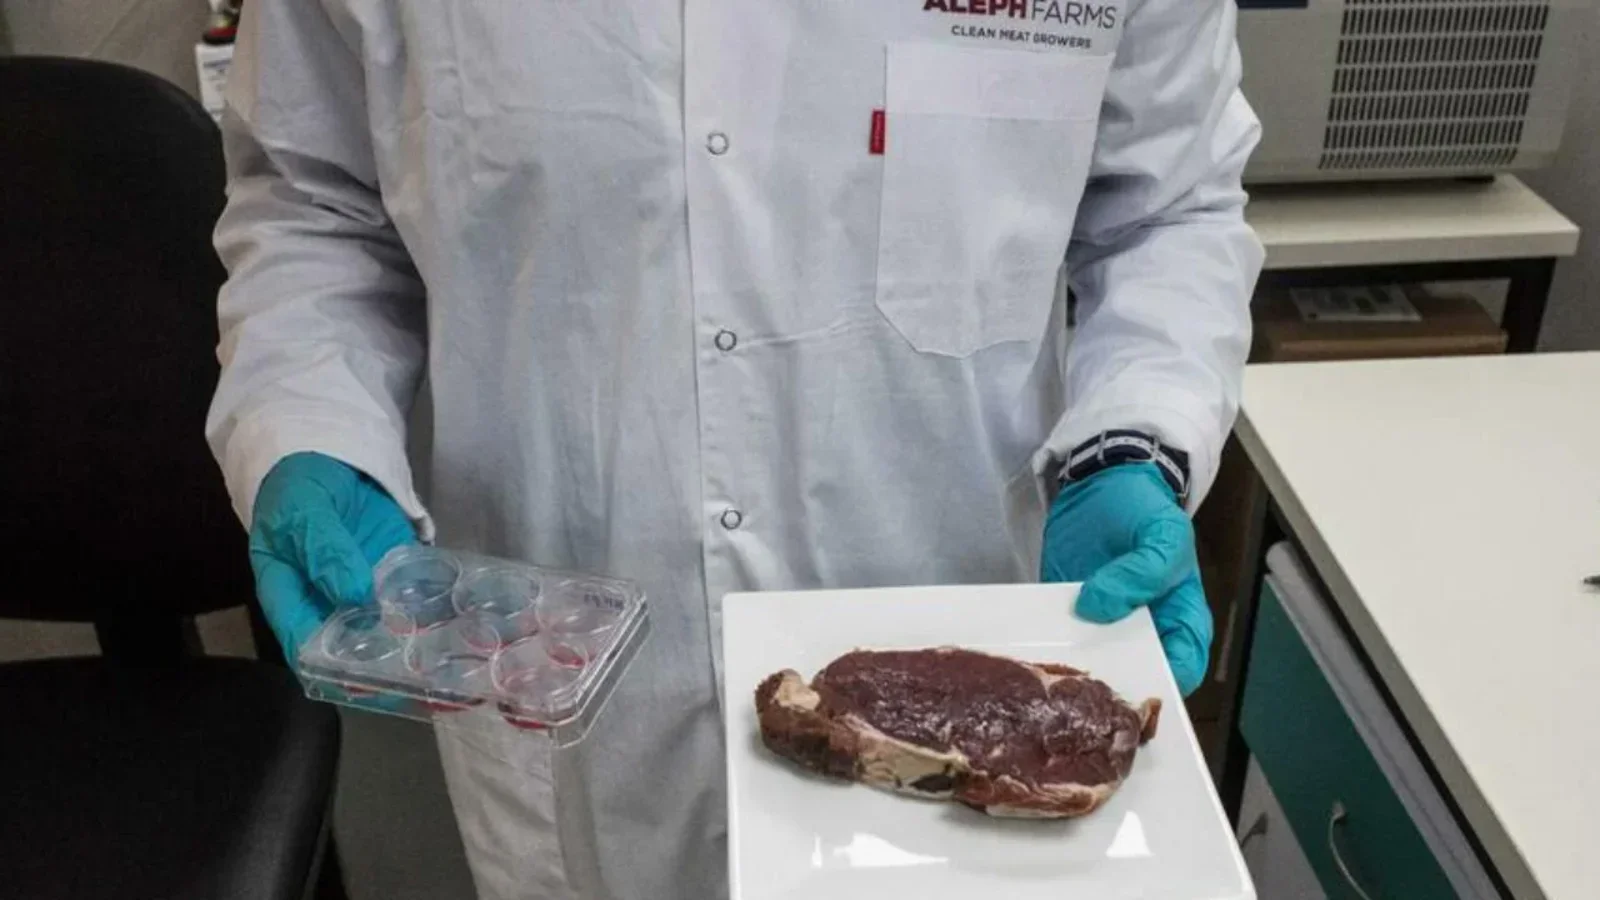 Aleph Farms partners with Enzymit biotech company to develop alternatives for cultivated meat production